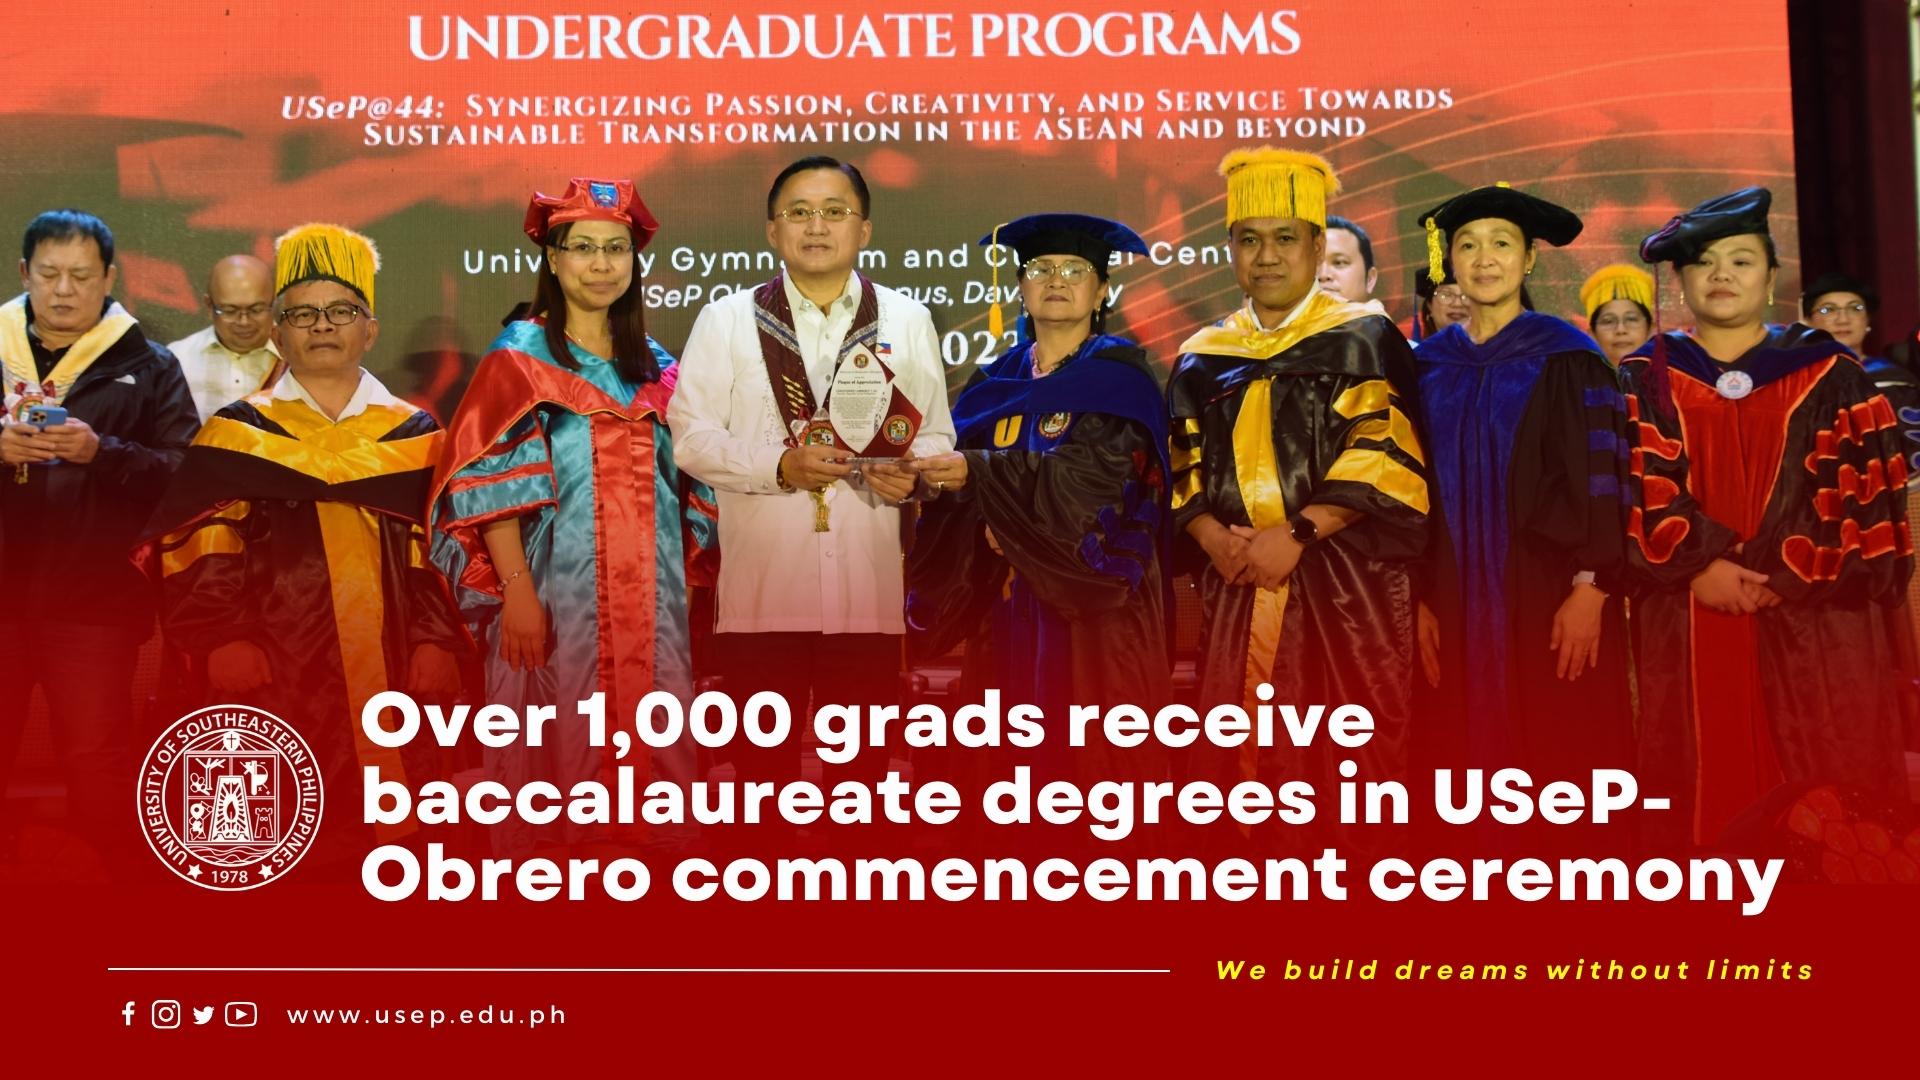 Over 1,000 grads receive baccalaureate degrees in USeP-Obrero commencement ceremony